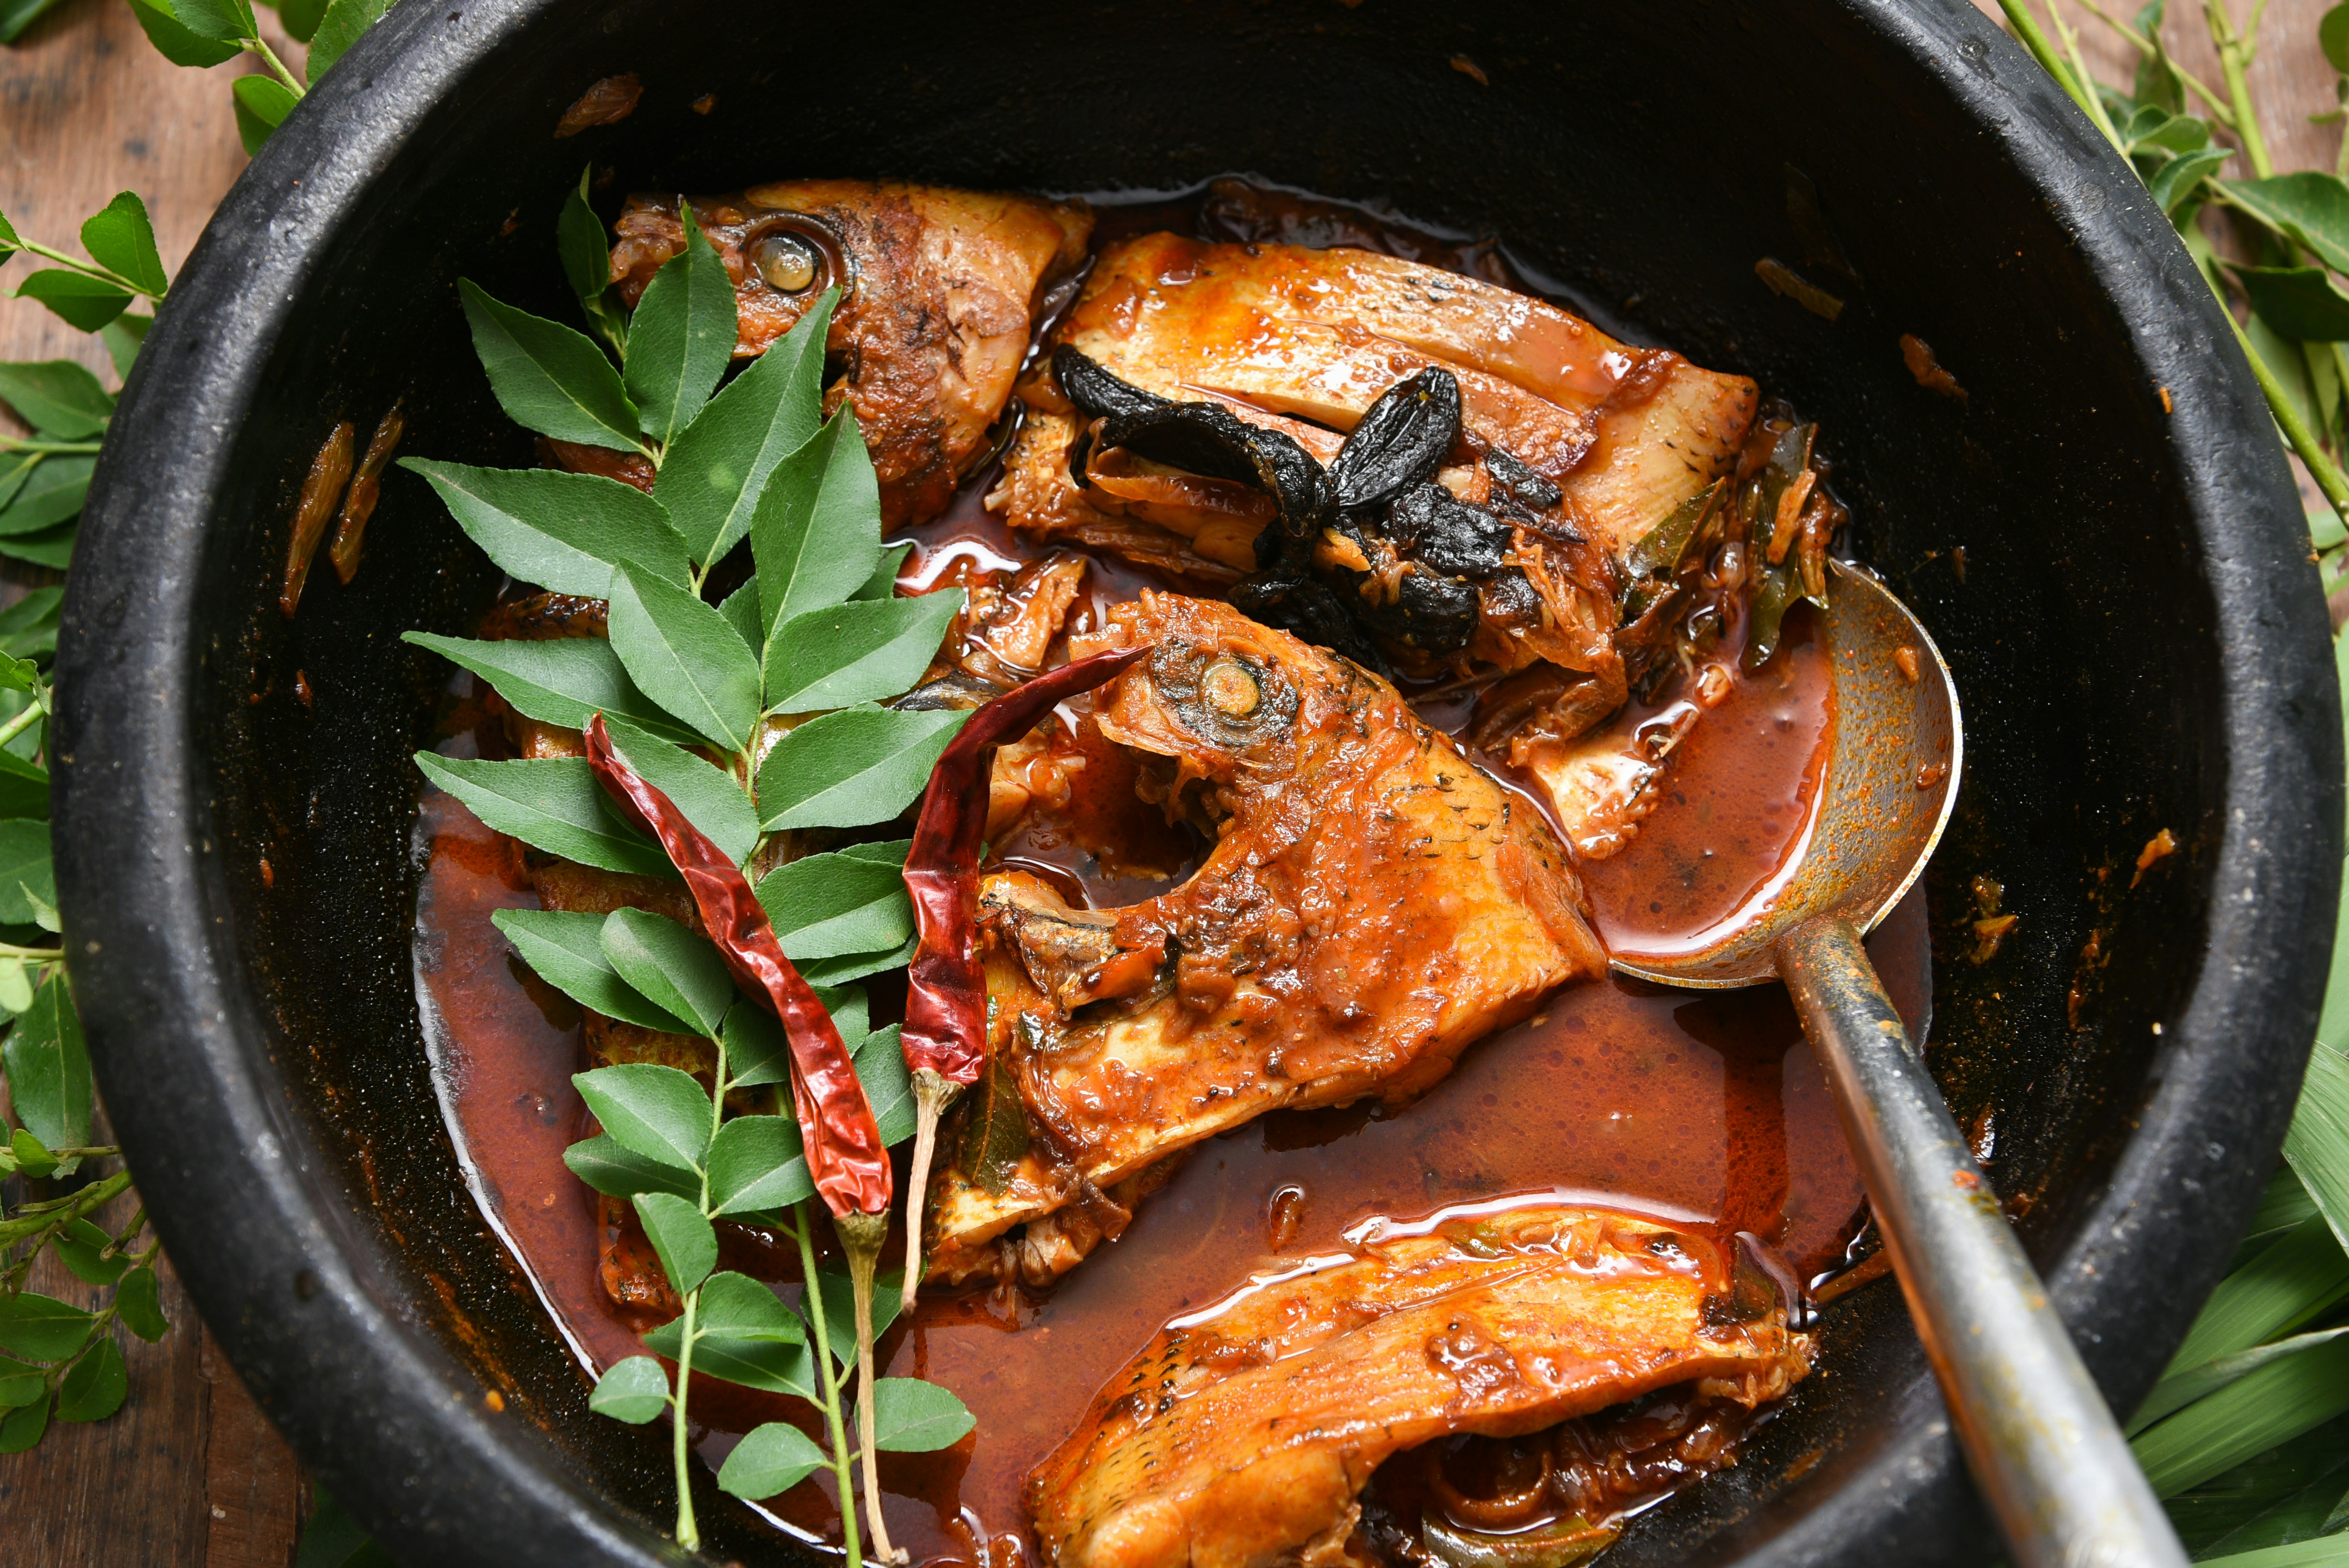 A close-up of fish curry, with chillies and spices, in a large black bowl